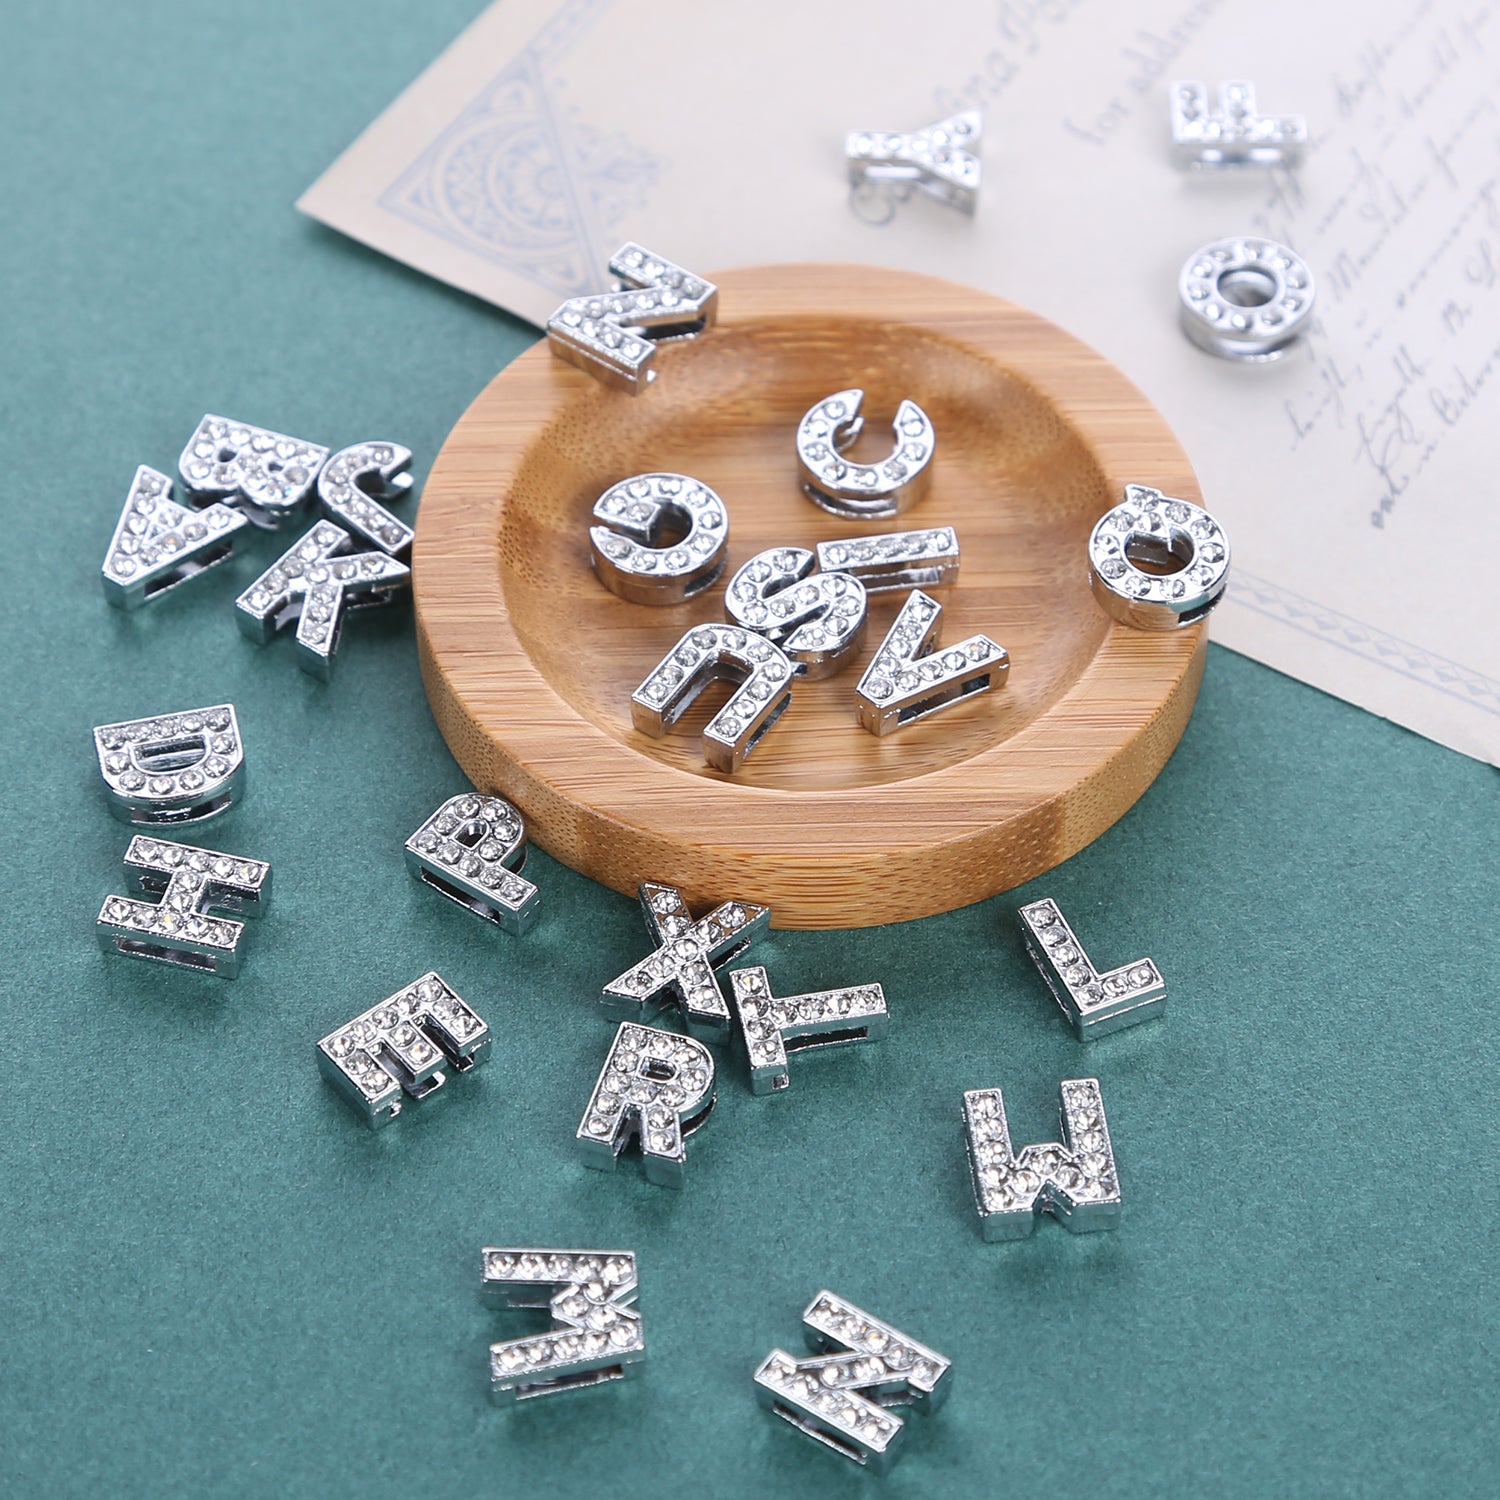 8mm silver Russian letters jewellery making materials slider